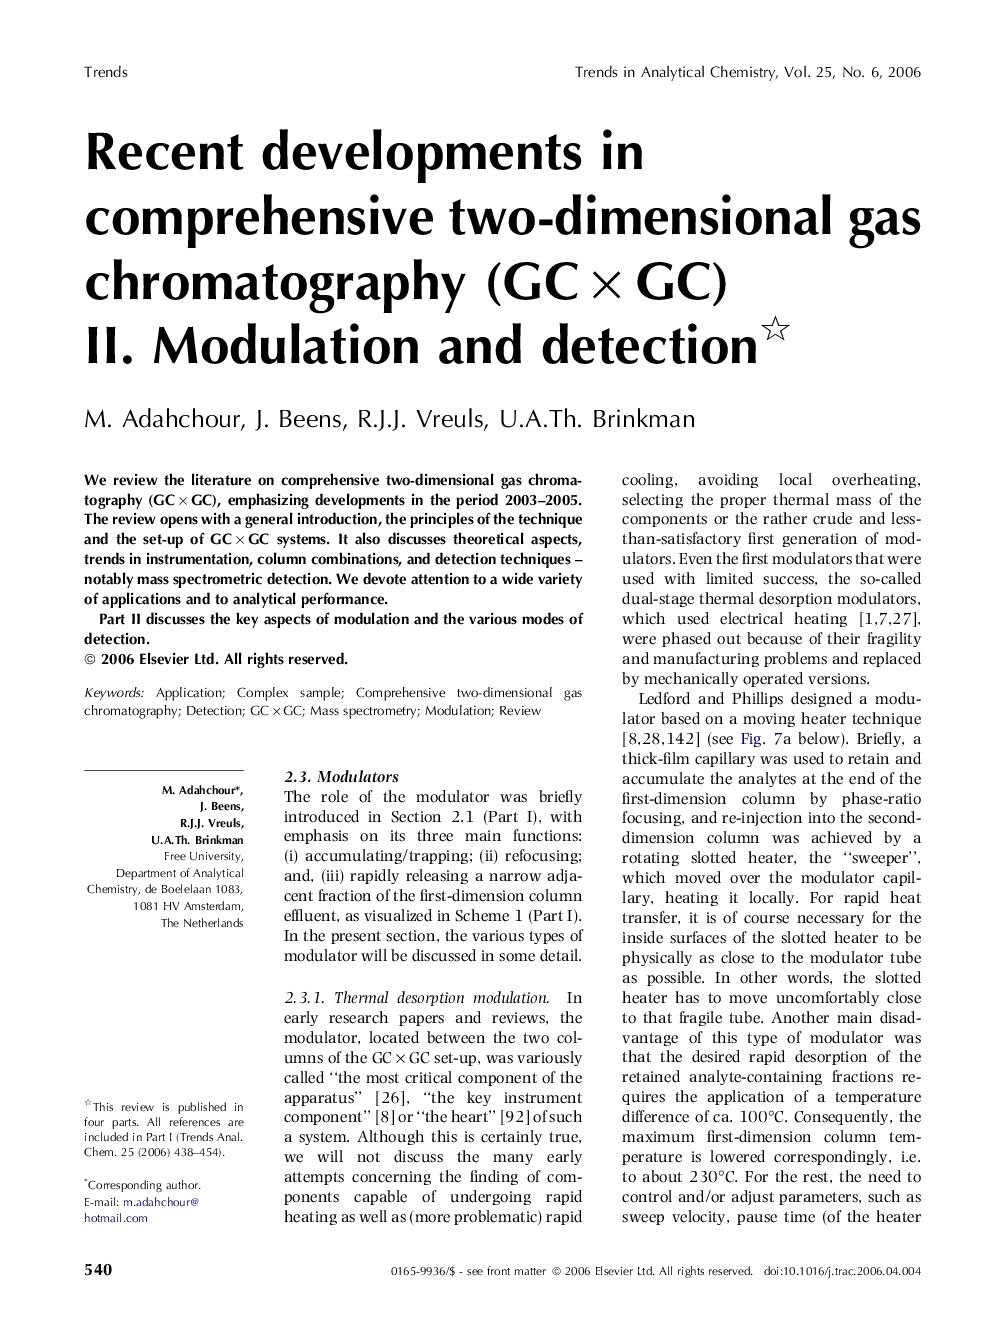 Recent developments in comprehensive two-dimensional gas chromatography (GC × GC) : II. Modulation and detection